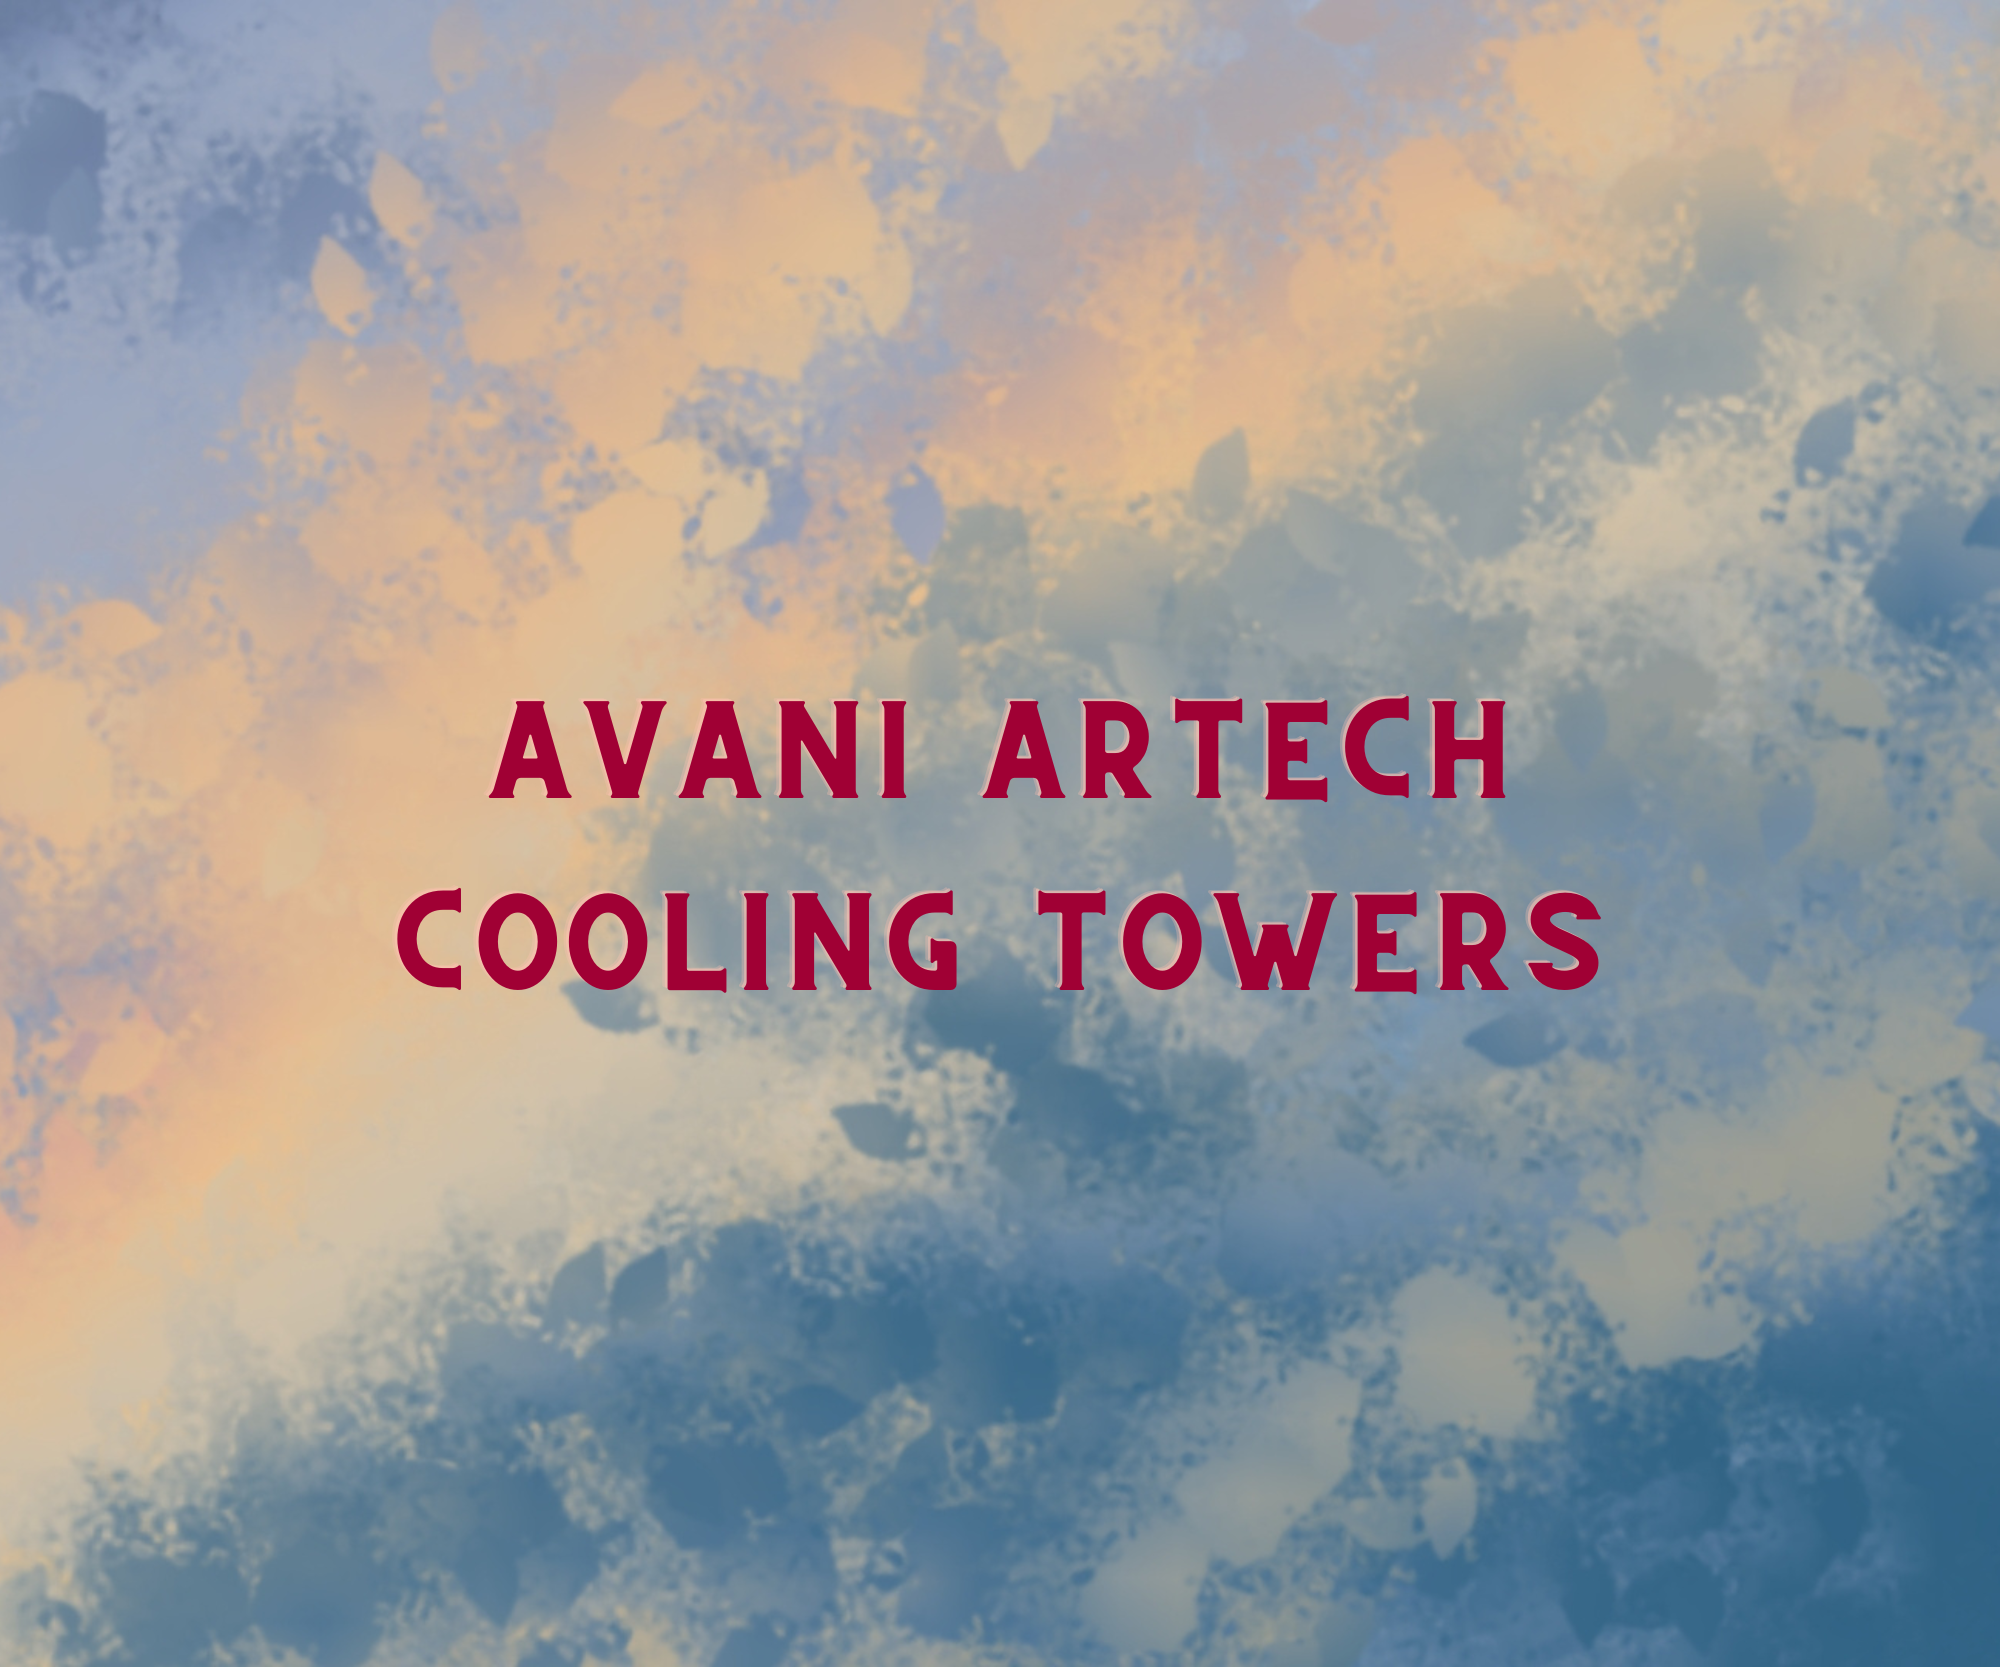 Avani Artech Cooling Towers,   